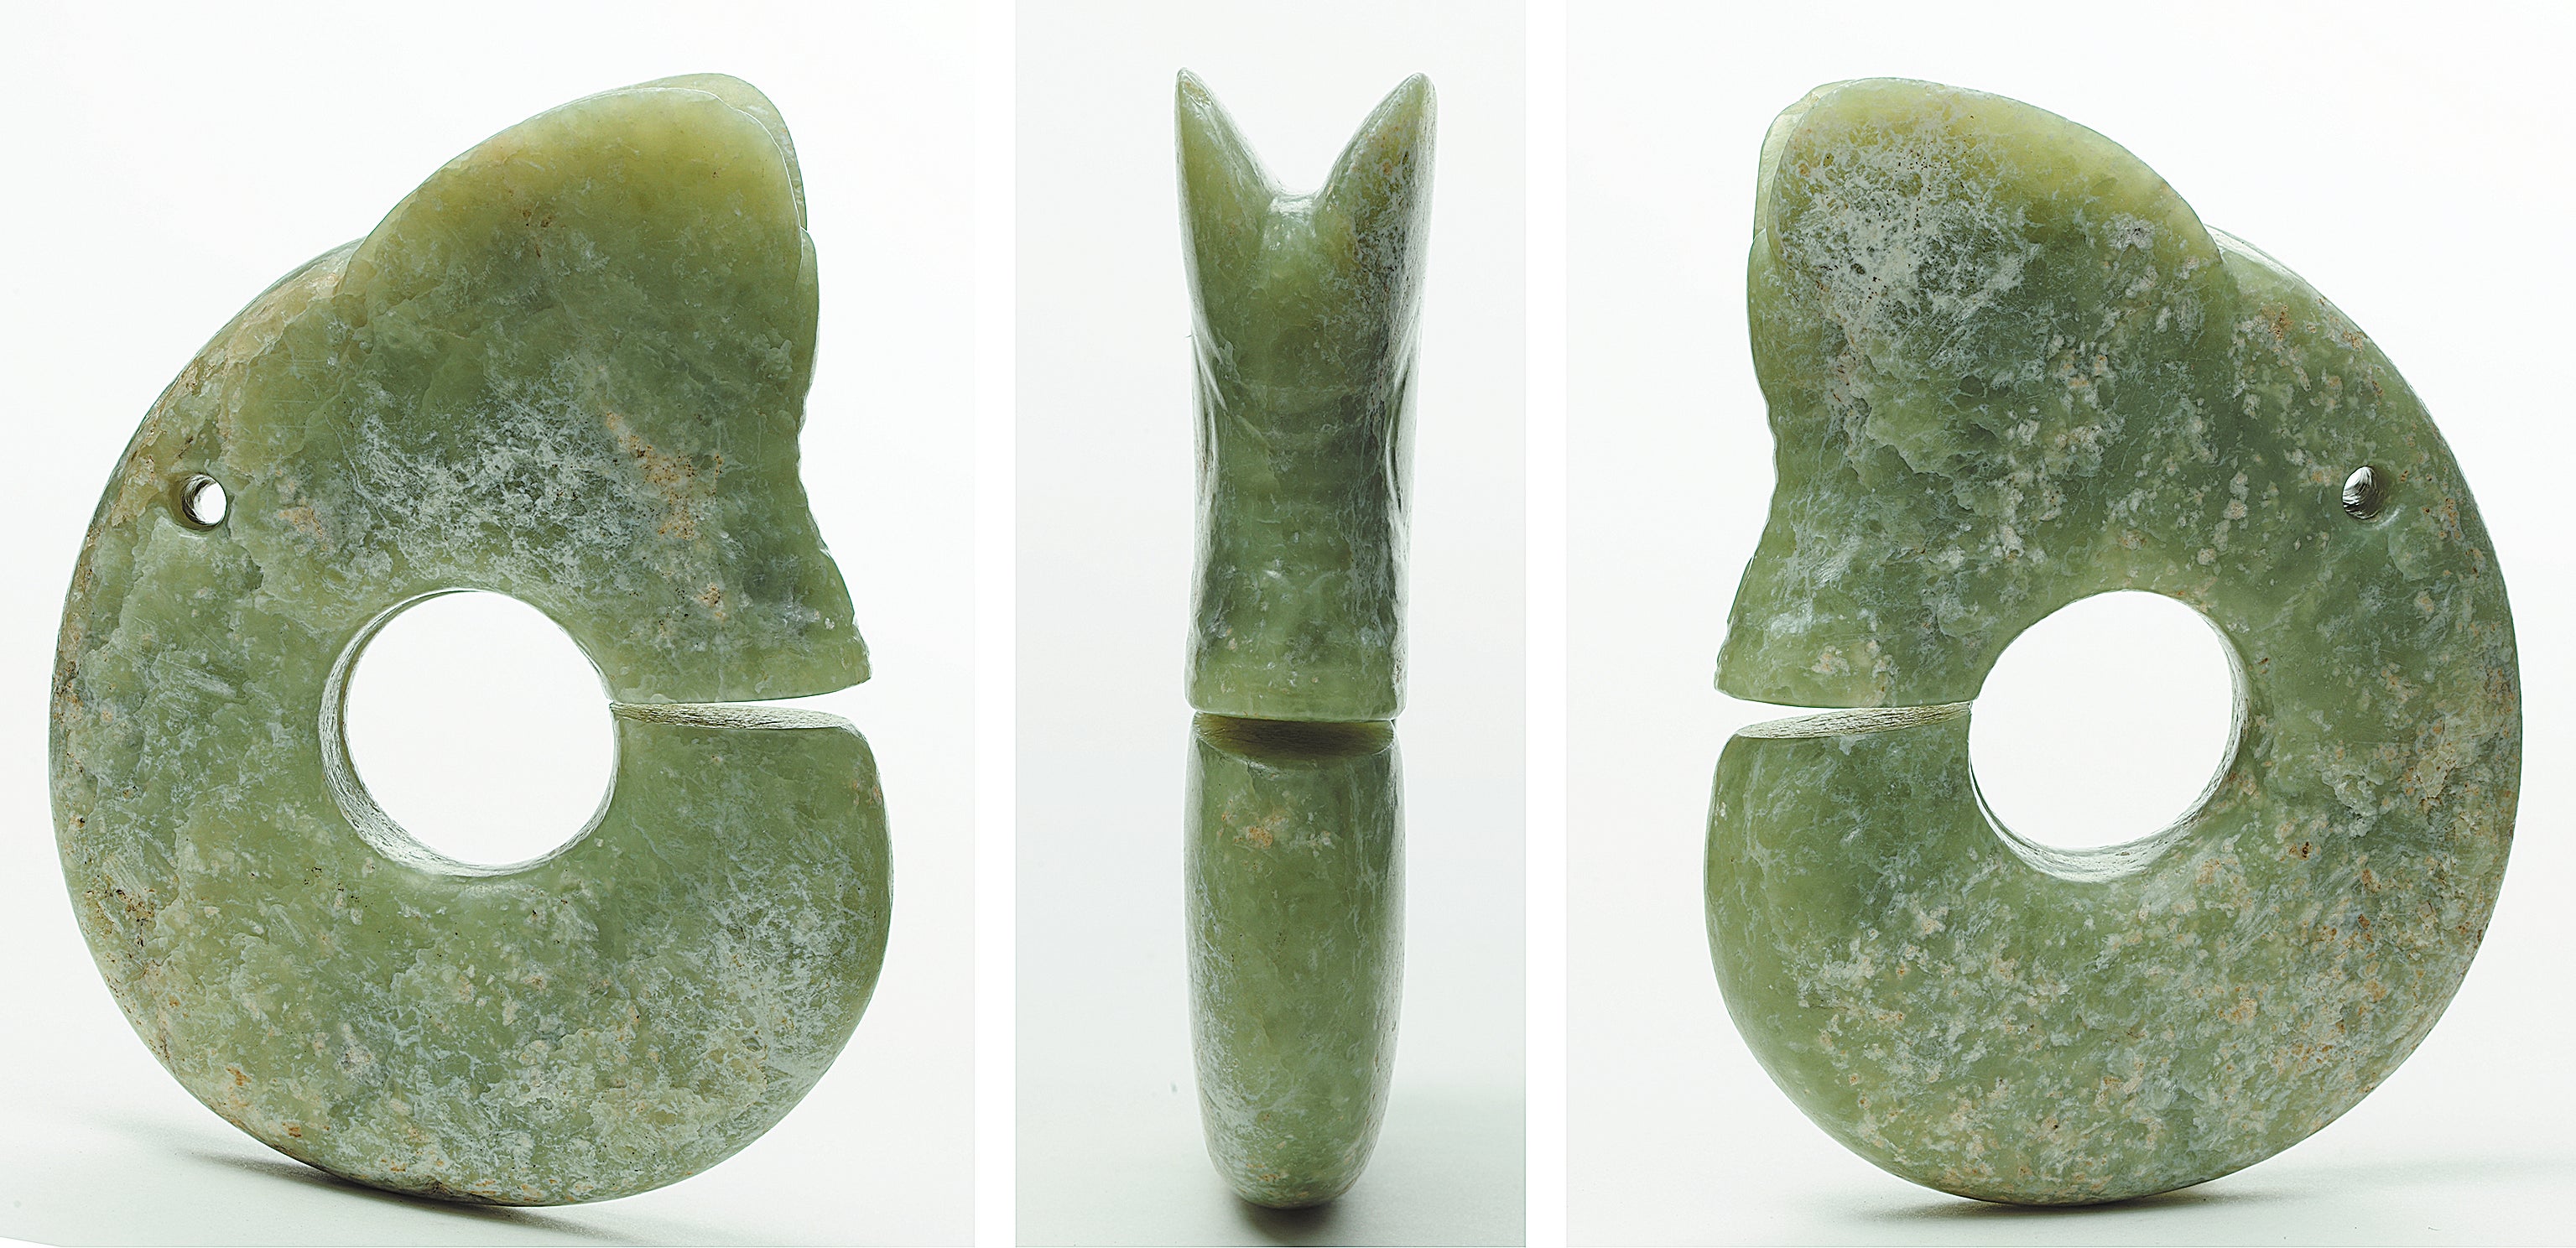 A dragon-shaped jade item unearthed from Banlashan in Chaoyang city, Liaoning province. The site is one of the major archaeological findings of the Neolithic Hongshan Culture, which is renowned for its exquisite jades